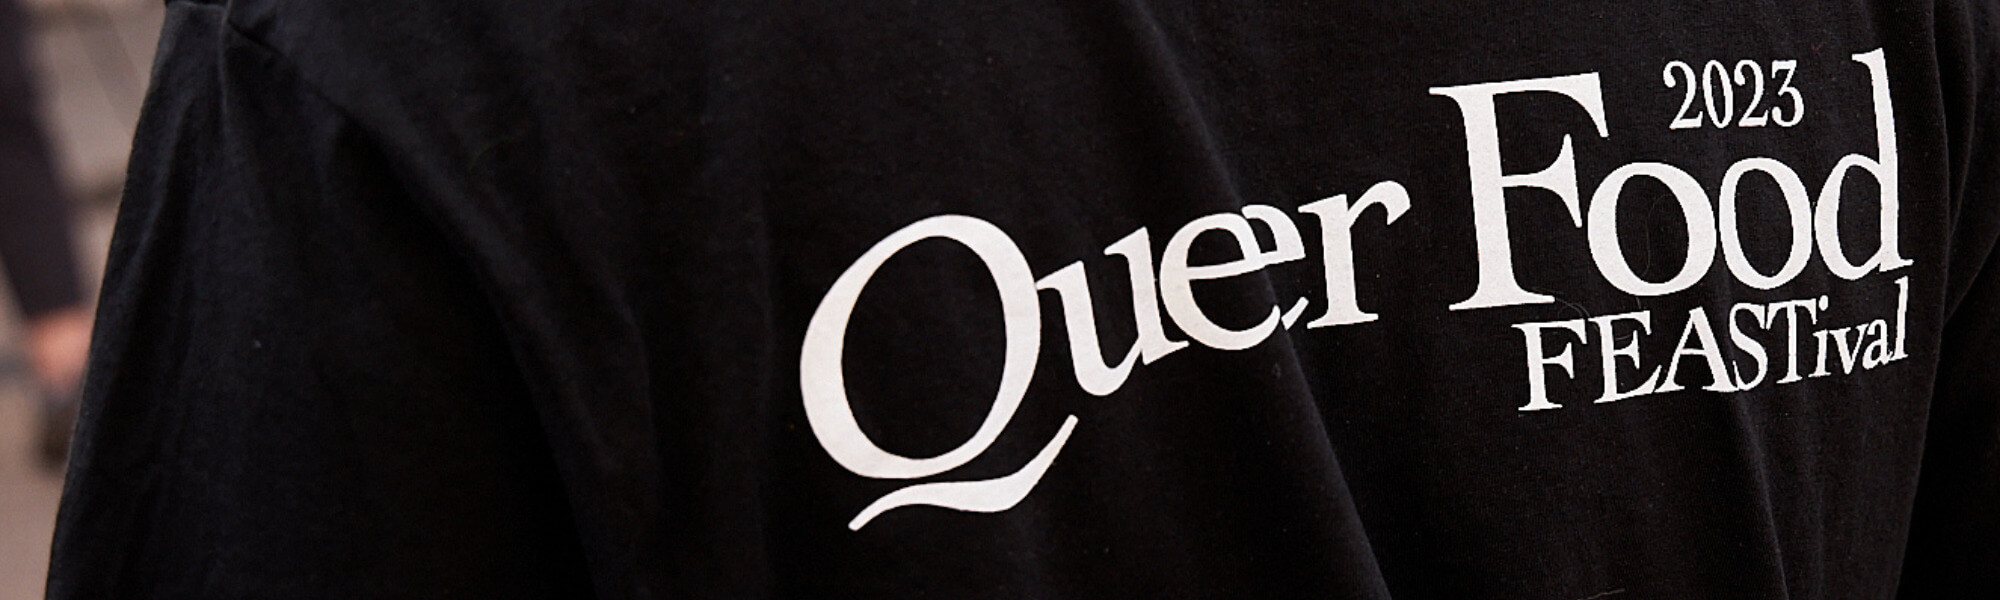 t shirt logo up close of queer food feastival